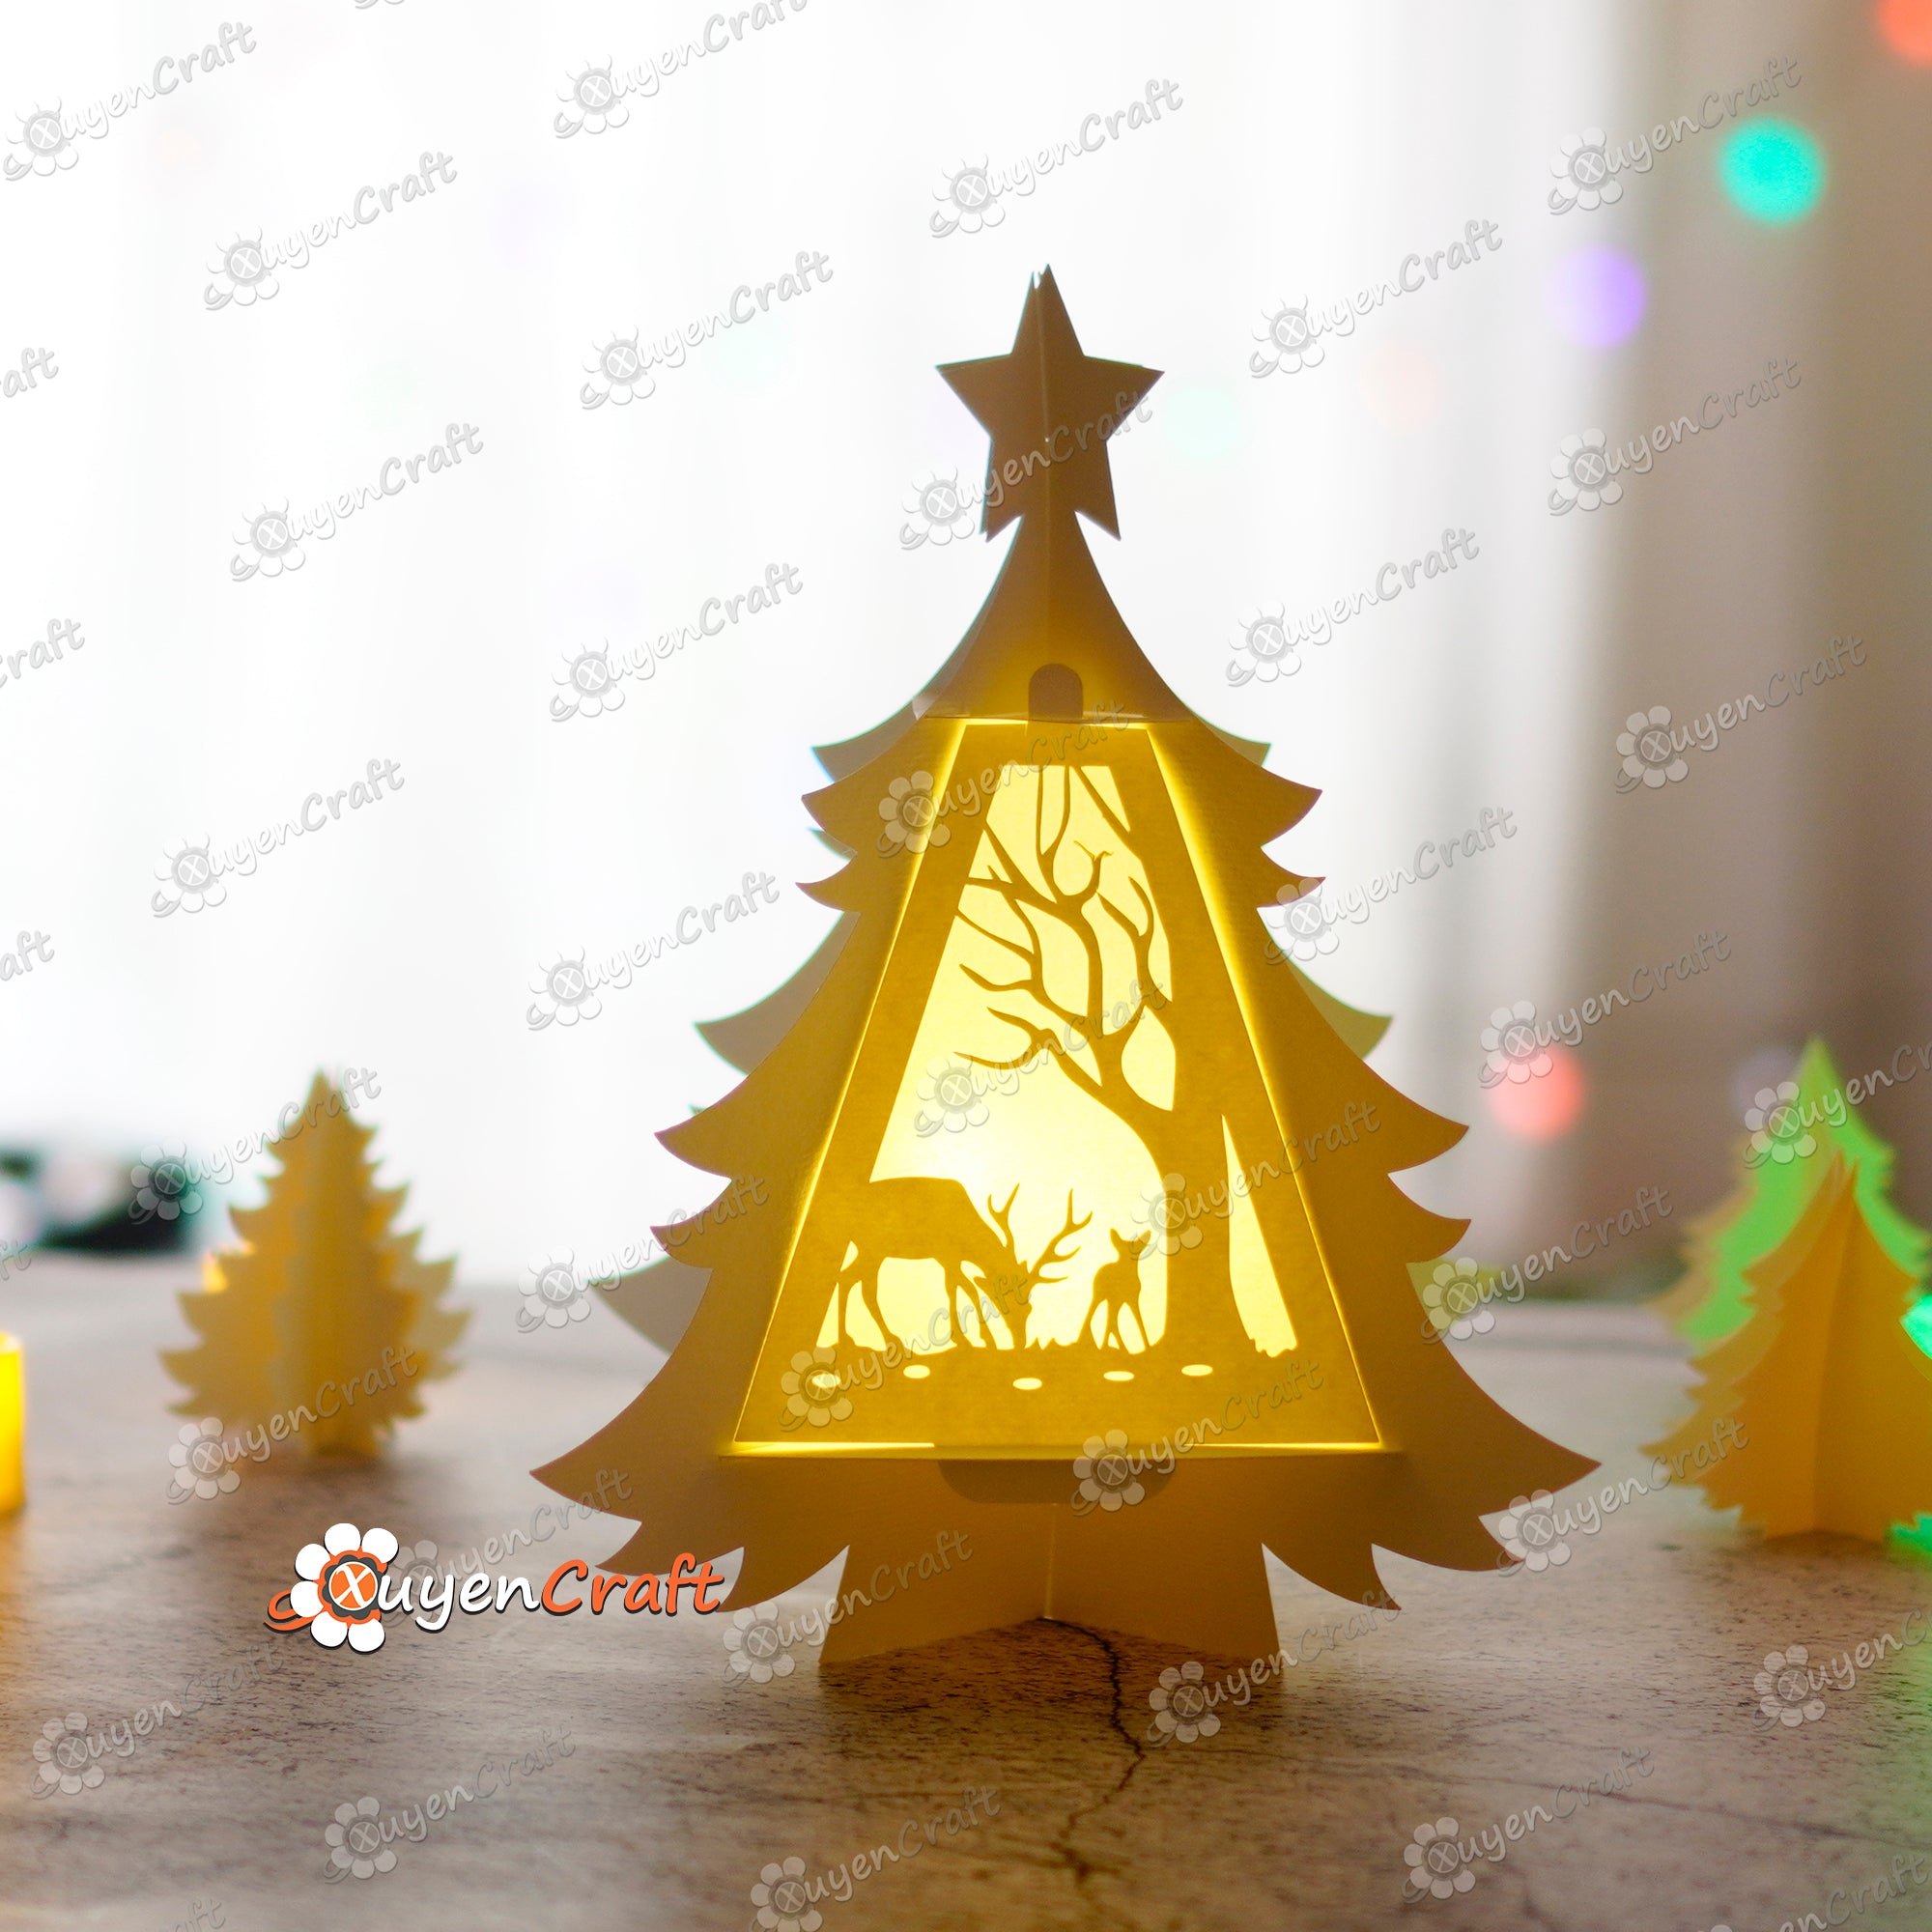 Pack 3 Christmas Tree Lantern SVG for Cricut Projects - Paper Cut Template For Christmas